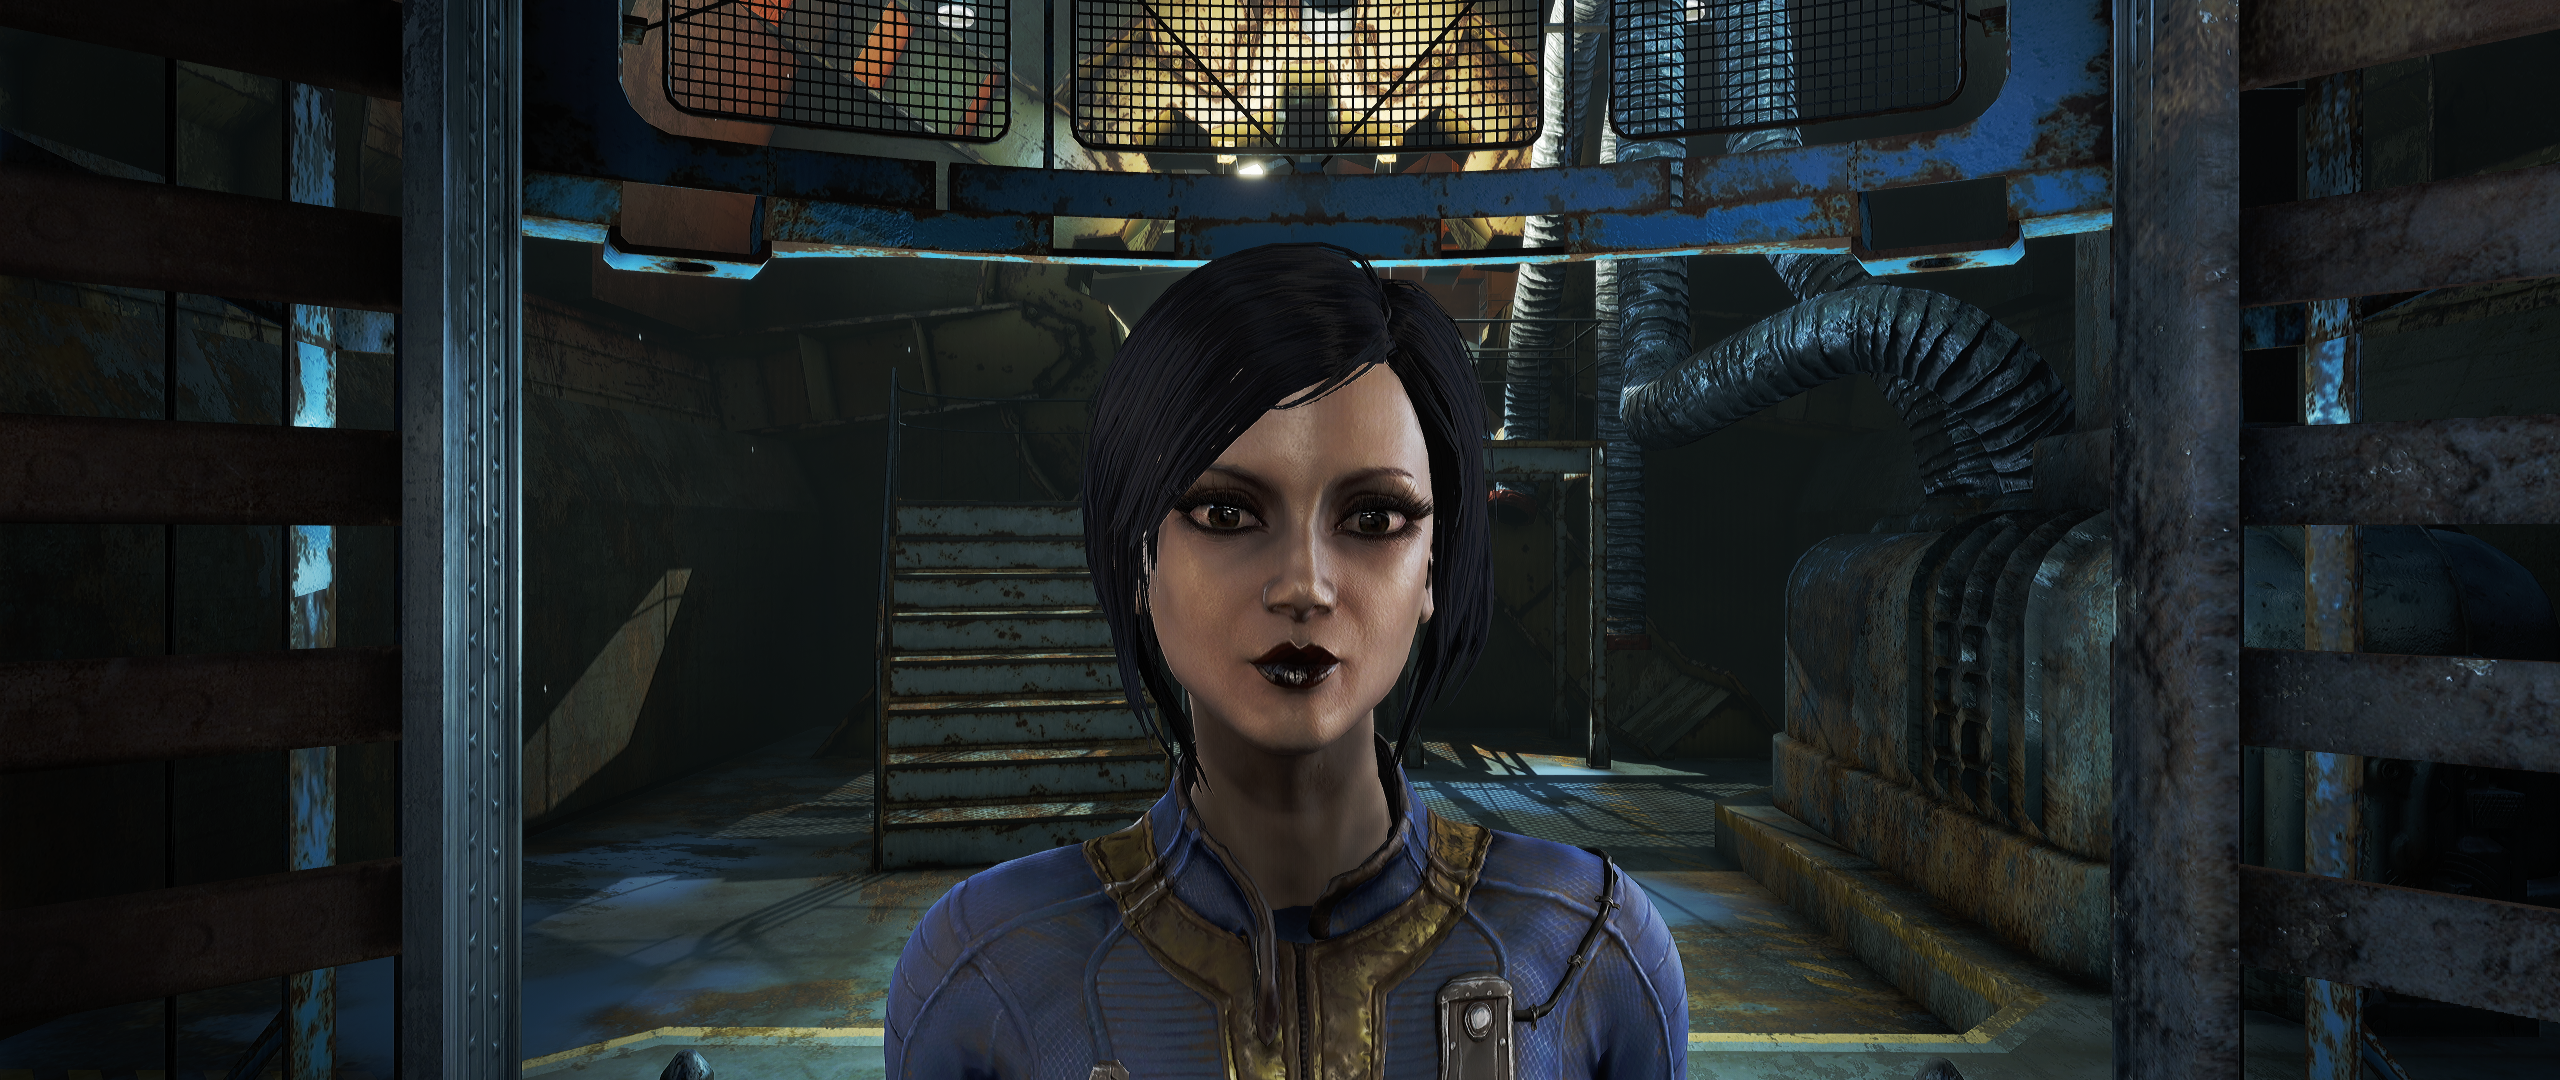 General 2560x1080 Fallout Fallout 4 RPG science fiction science fiction women dark hair dark eyes looking at viewer screen shot video games PC gaming